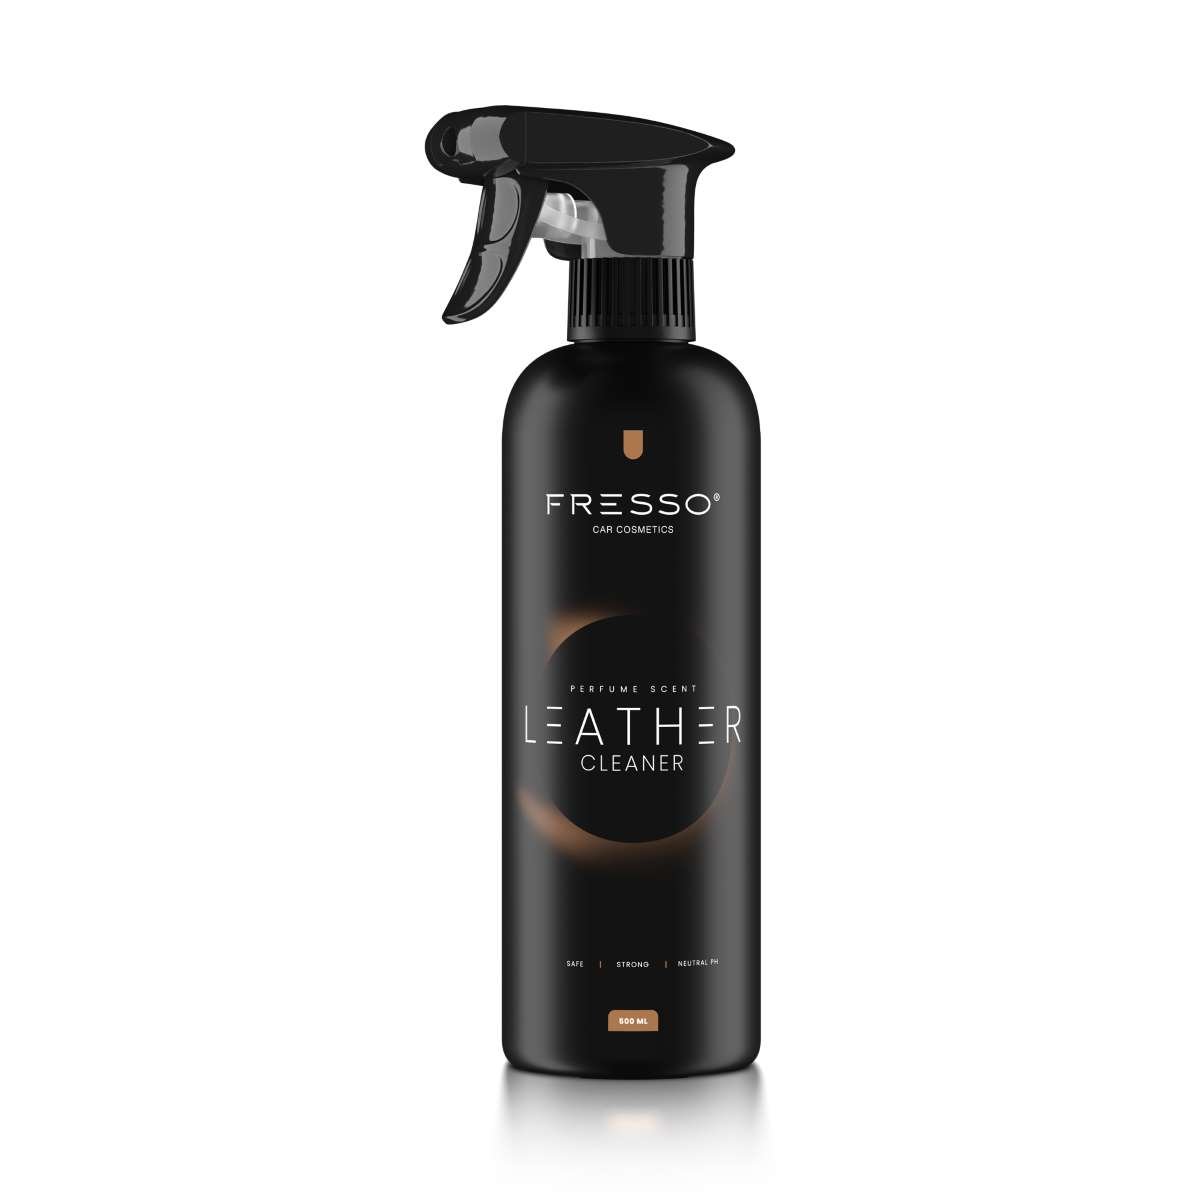 Perfume Scent Leather Cleaner - 500ml